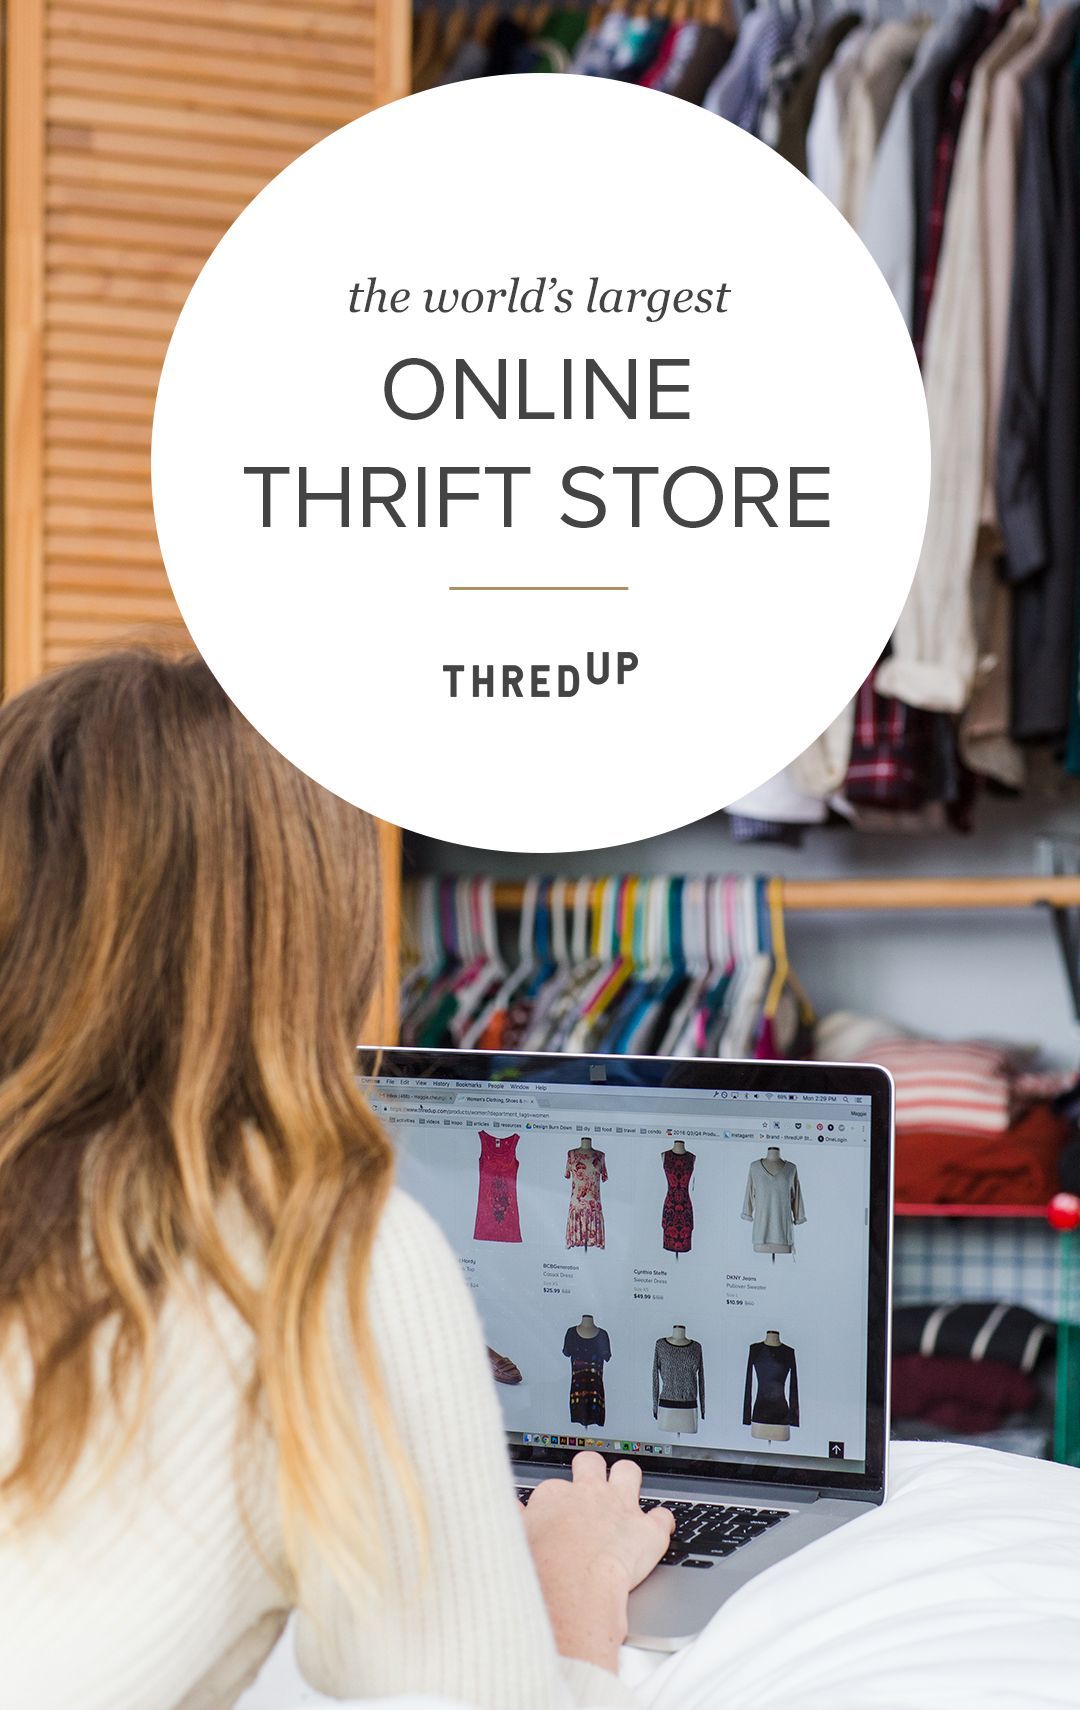 Shop thredUP, the world's largest online thrift store! thredUP has something for everyone with over 25,000 brands; whether you're looking for plus, maternity, petite, designer, kids, or all of the above, we've got you covered. Sign up now for 20% off your first purchase! -   21 DIY Clothes Man wardrobes
 ideas